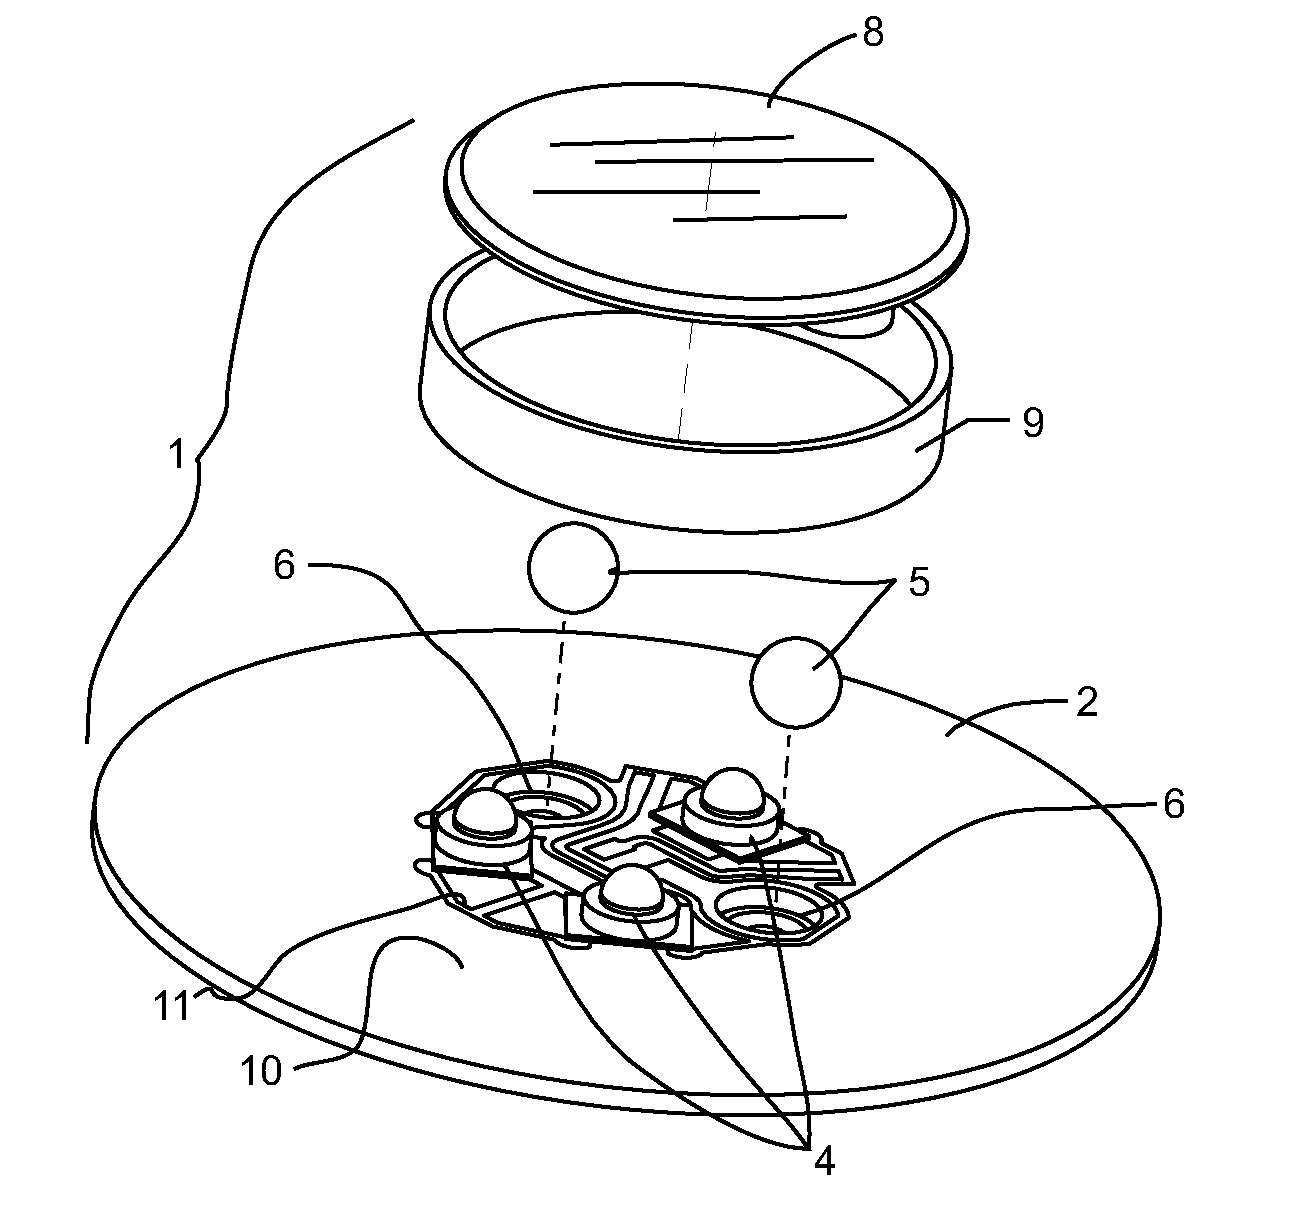 Modular lighting system and method employing loosely constrained magnetic structures